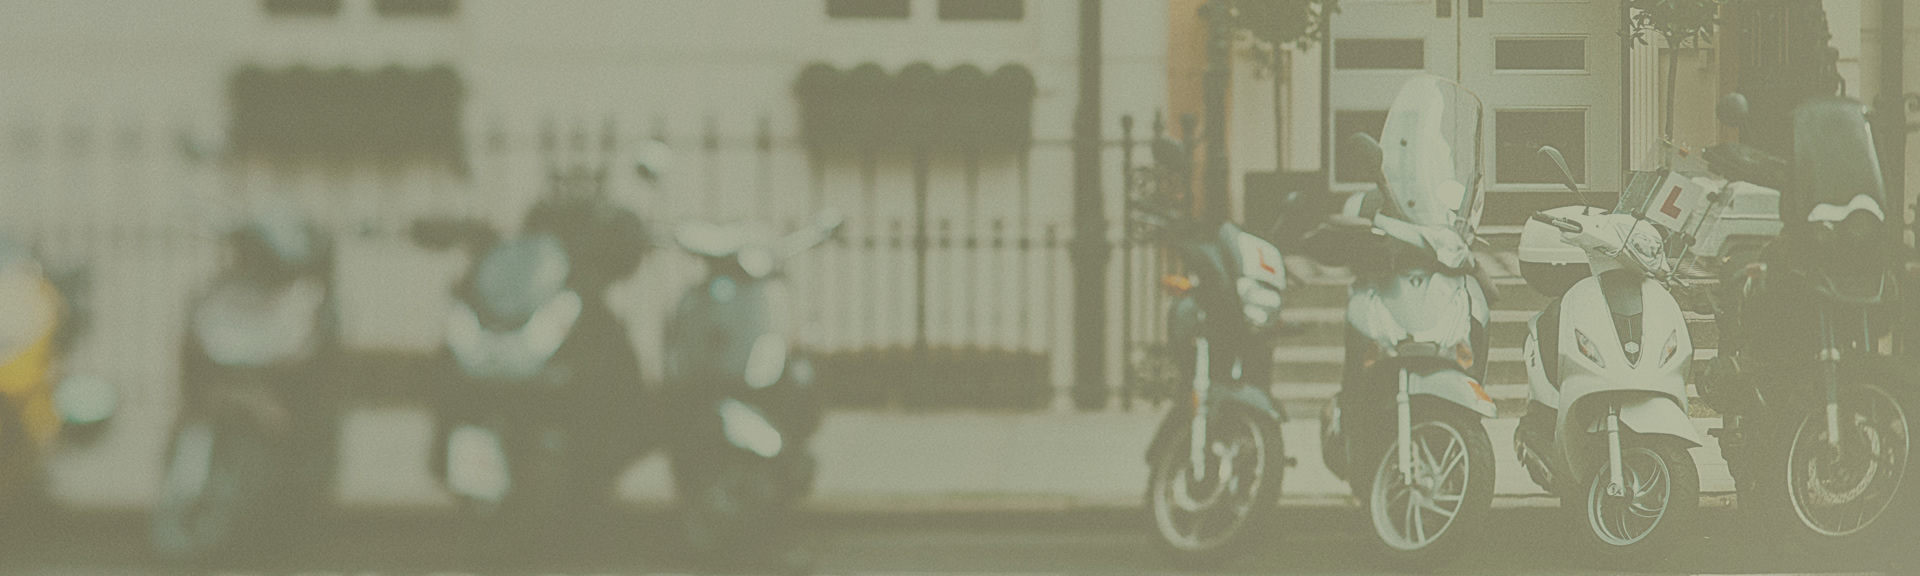 Marketing - Nice Scooters Lined Up On The Street - Background Image | Digital C4